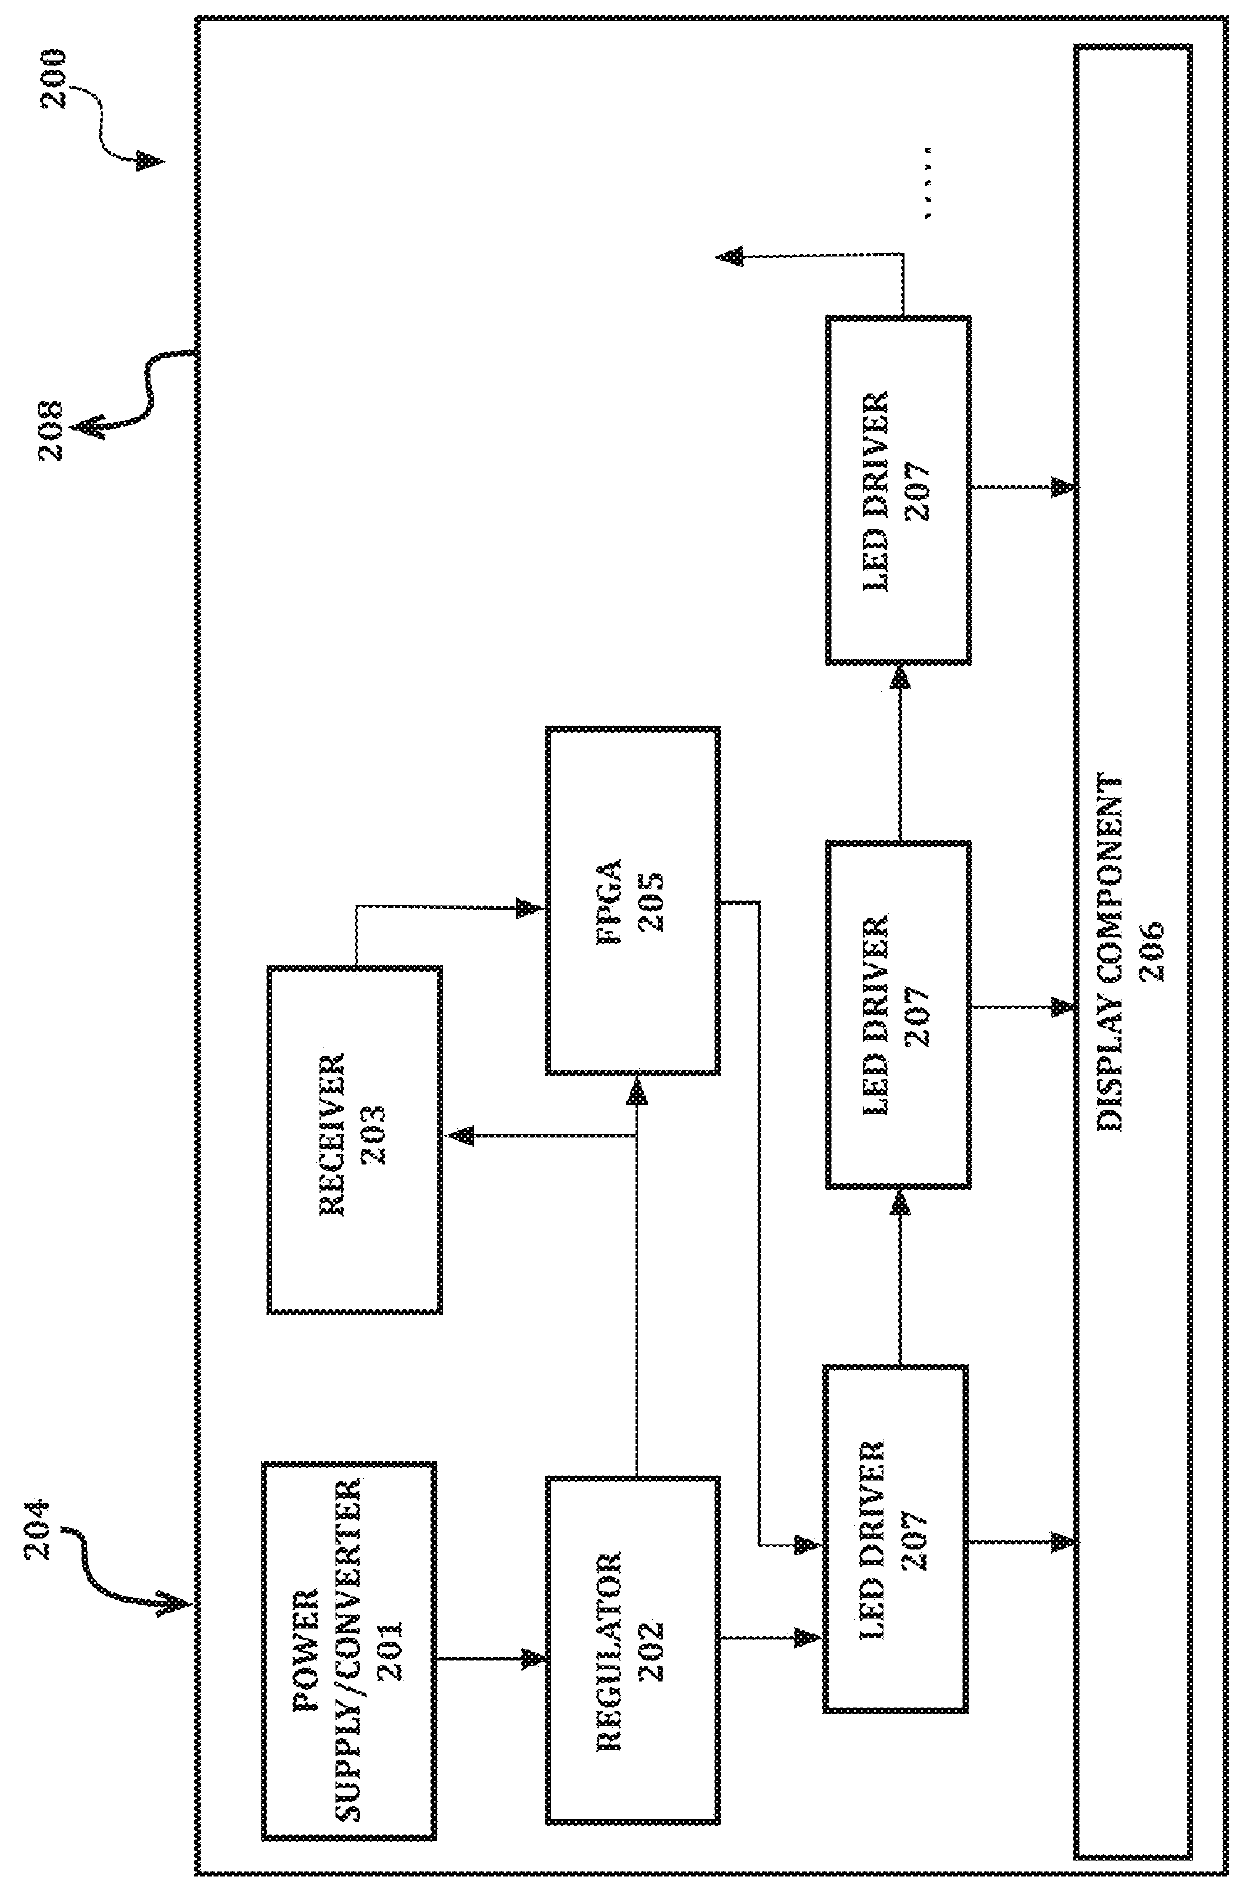 Merchandising communication and inventorying system